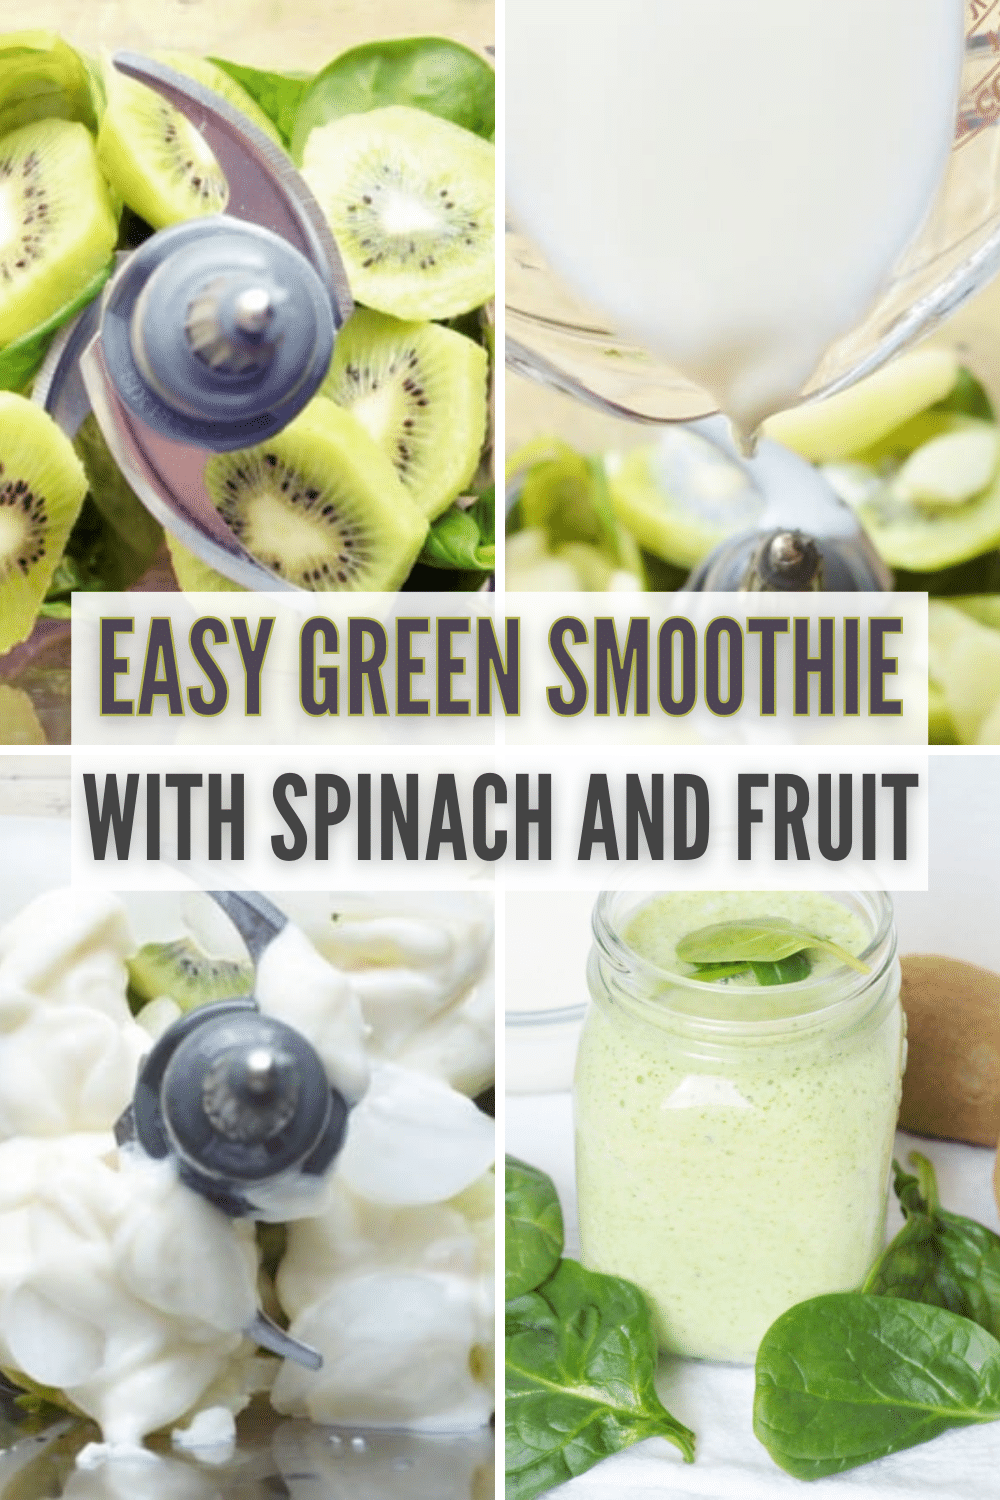 This is an awesome recipe for an easy green smoothie that makes eating healthy a joy and not a burden. #smoothie #healthyeating #easybreakfast via @wondermomwannab